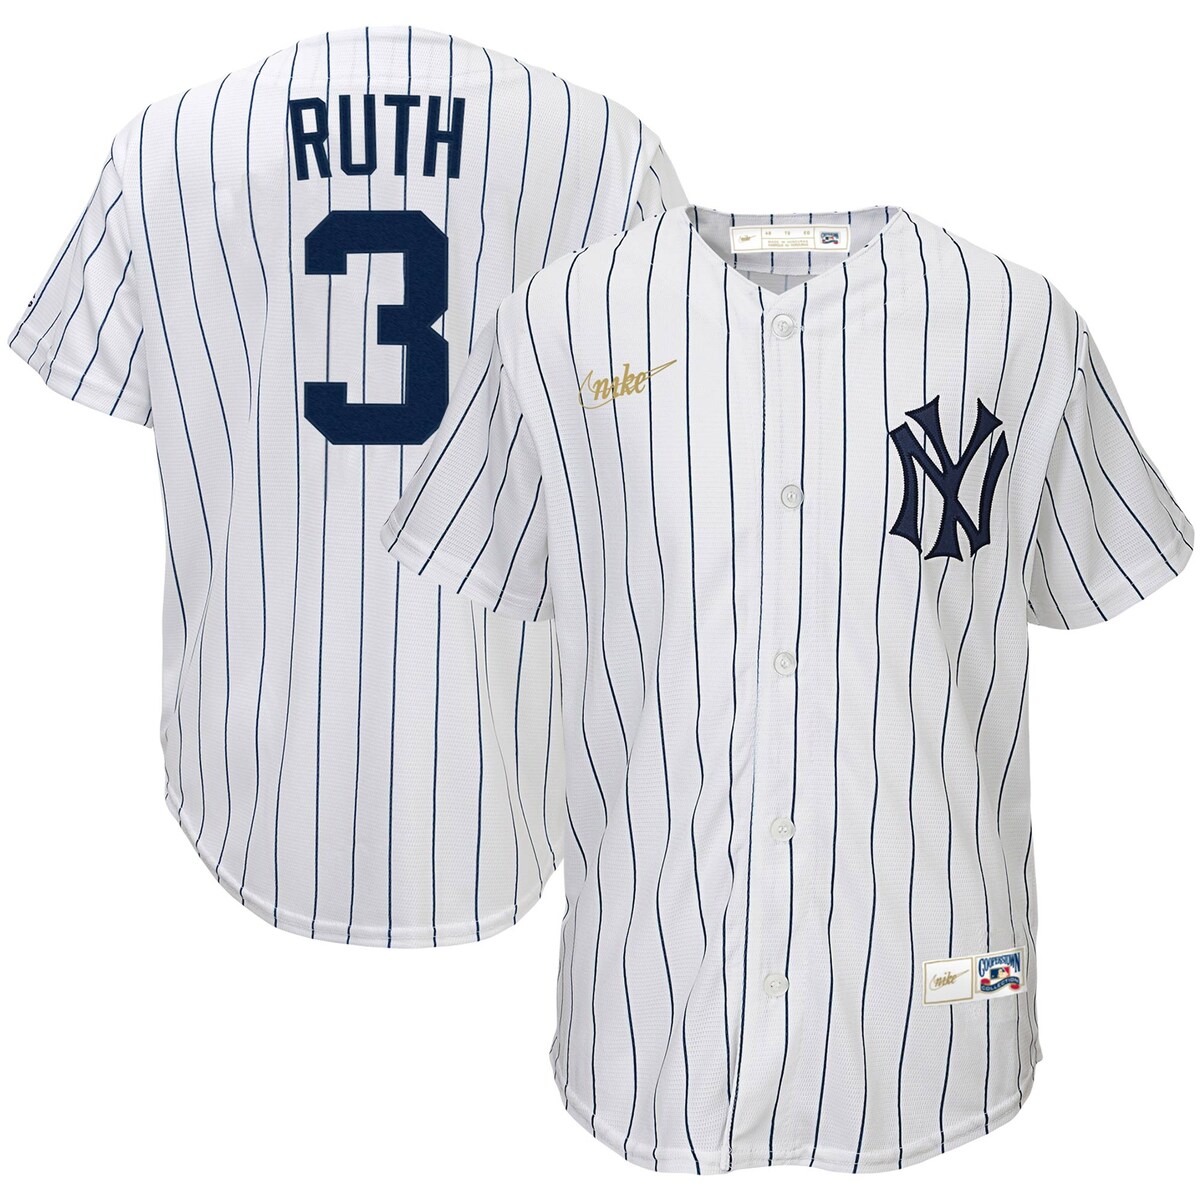 MLB ヤンキース ベーブ・ルース ユニフォーム Nike ナイキ キッズ ホワイト (Youth MLB Nike Offical Cooperstown Player Jersey)